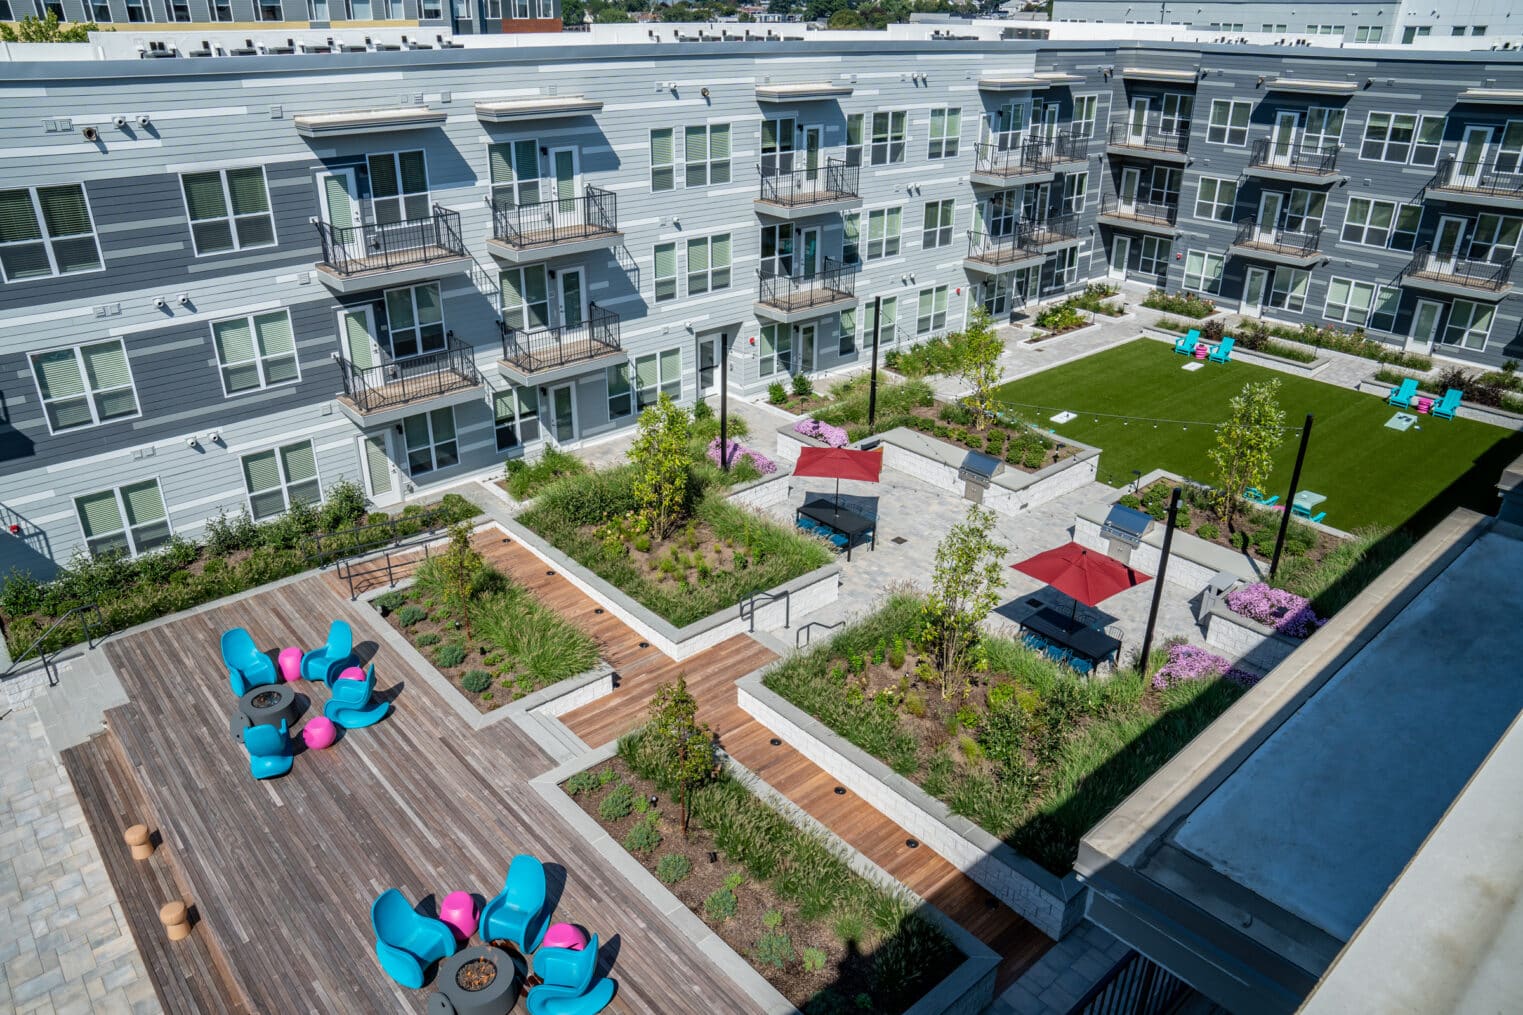 A 3rd floor courtyard, built by Dex by Terra, at V2 Apartments in Chelsea, Massachusetts.